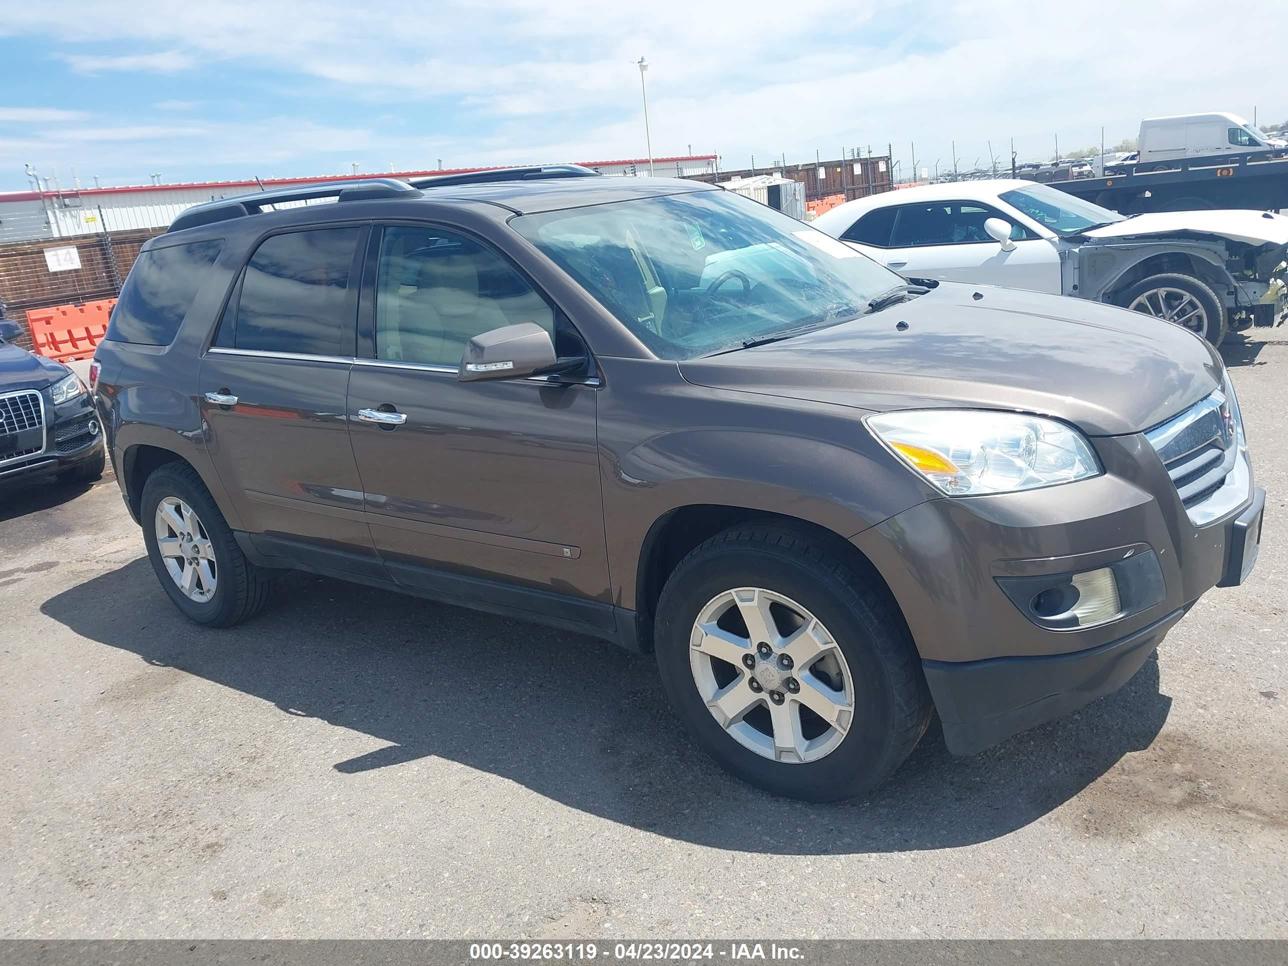 vin: 5GZER23757J125773 5GZER23757J125773 2007 saturn outlook 3600 for Sale in 80022, 8510 Brighton Rd., Commerce City, Colorado, USA